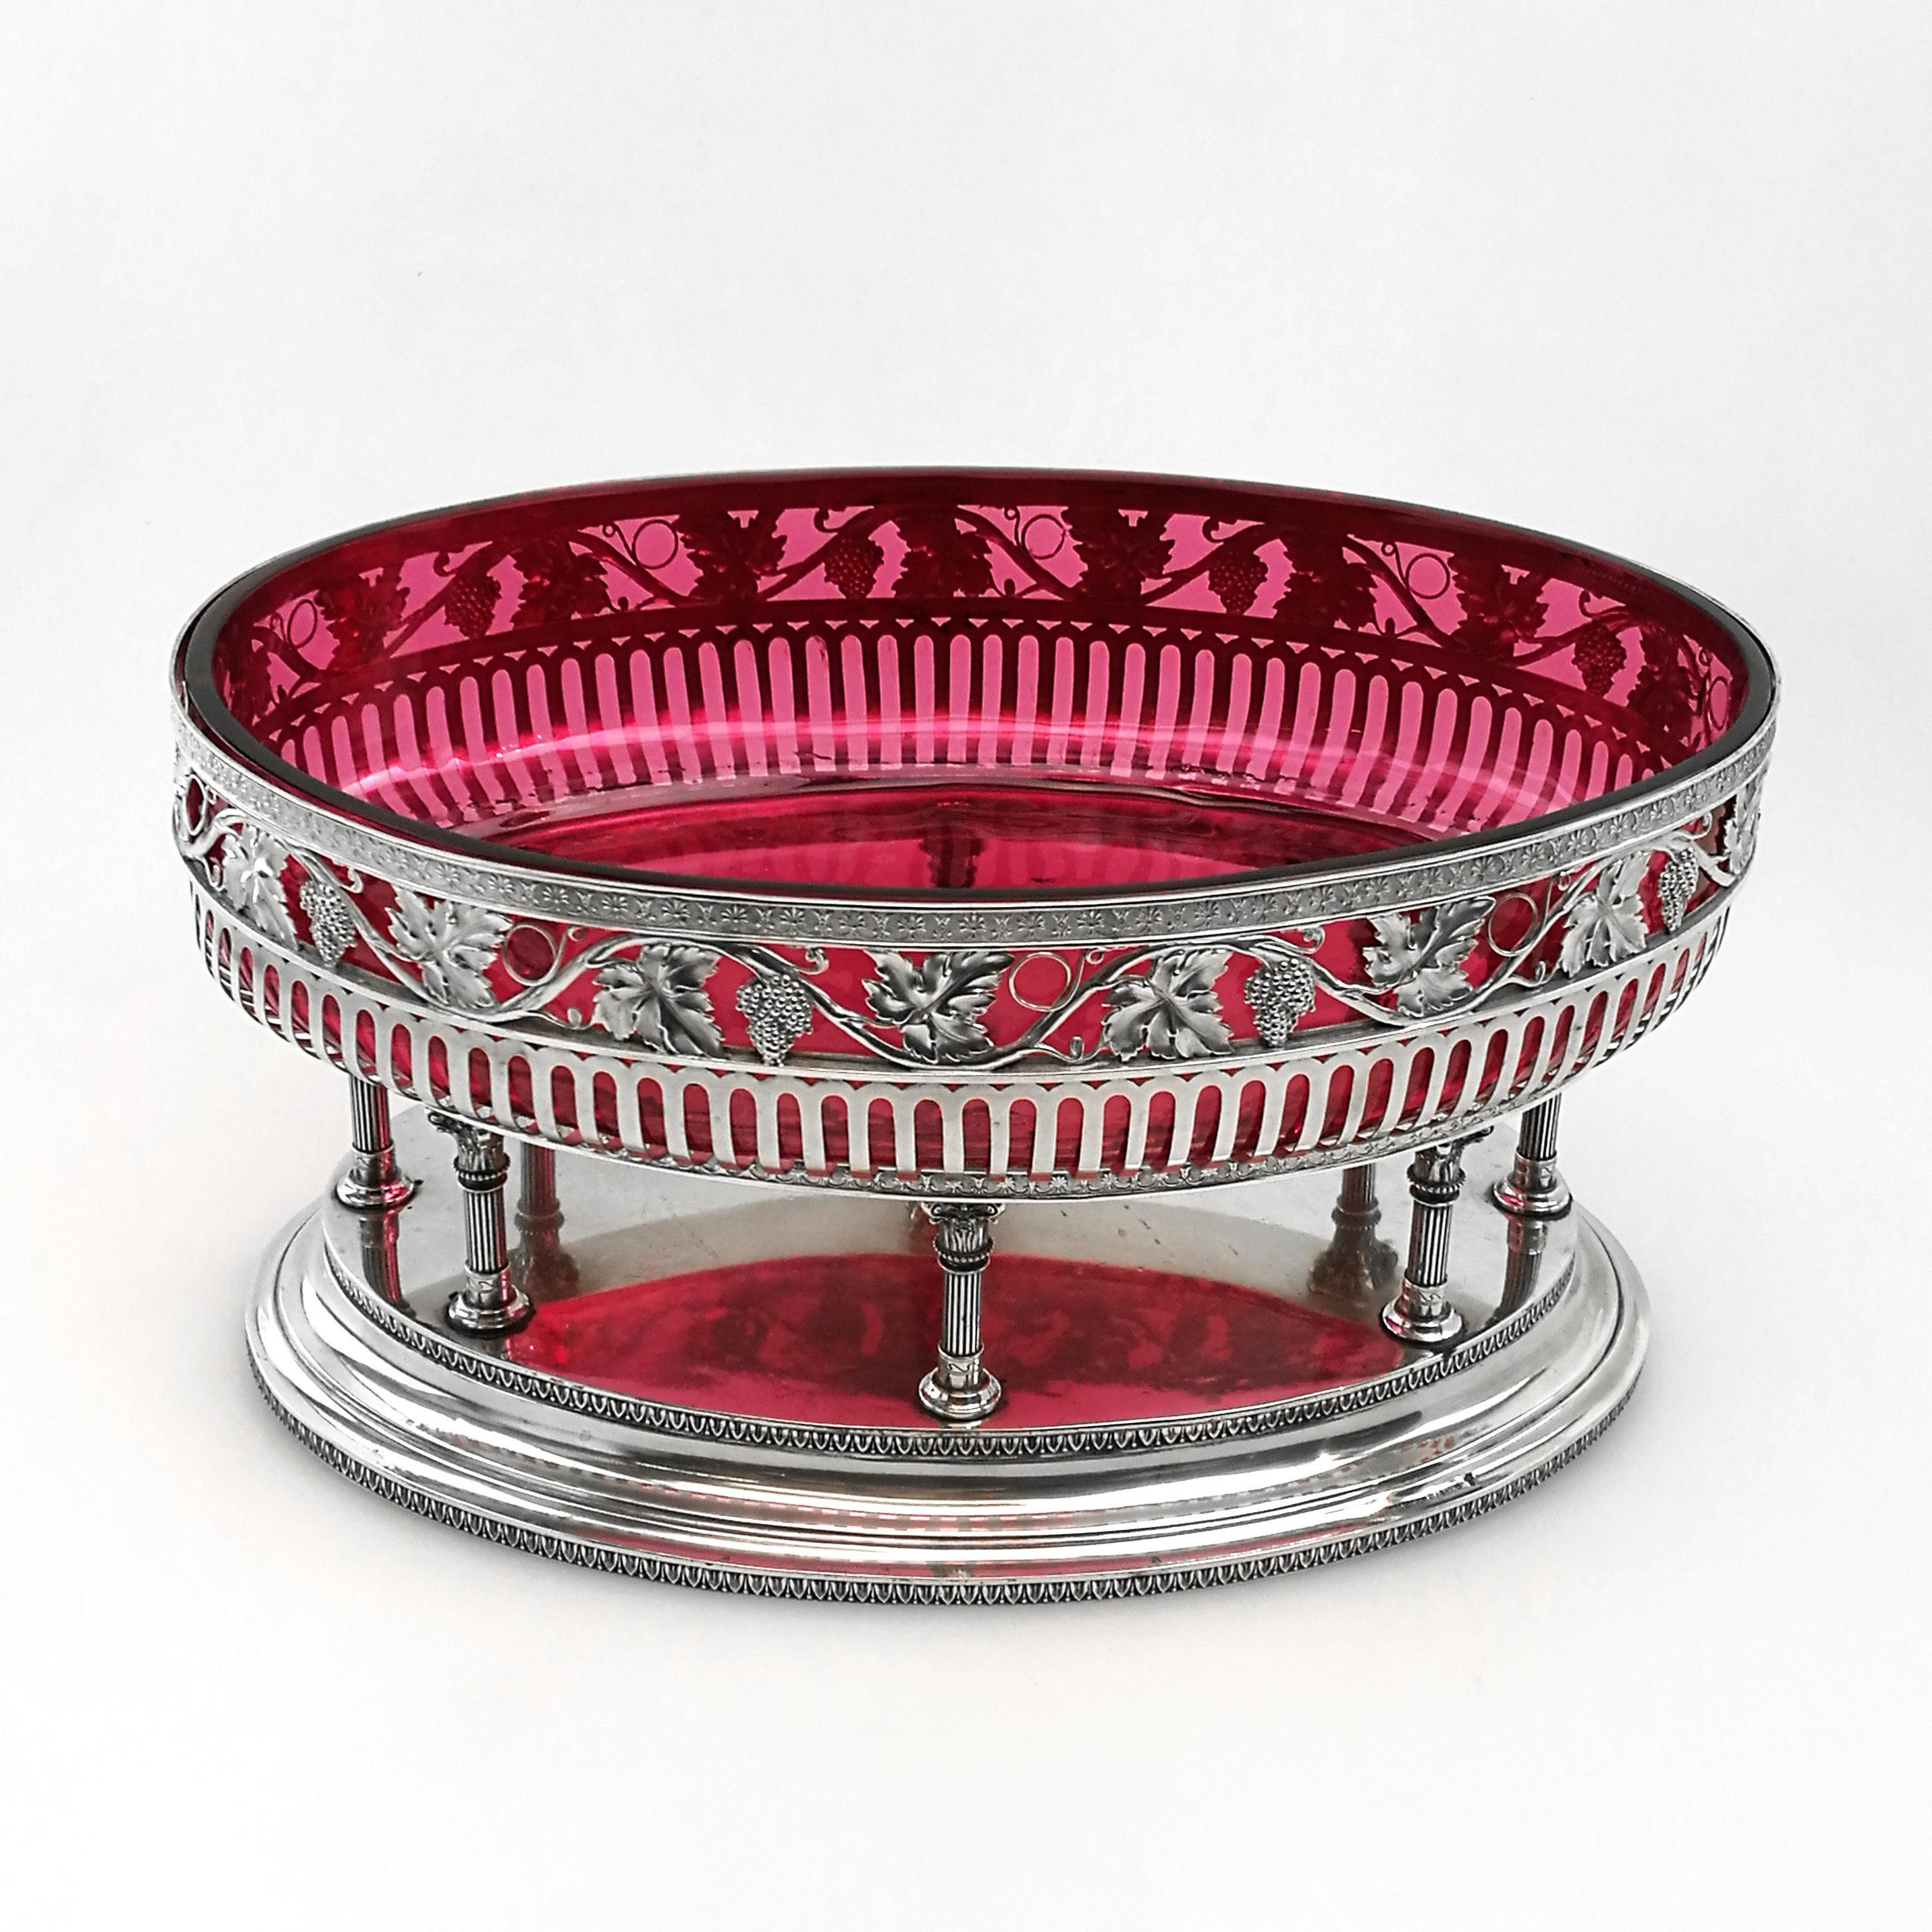 Early 20th Century Set of 3 German Solid Silver Comports / Dishes / Centrepiece, circa 1900